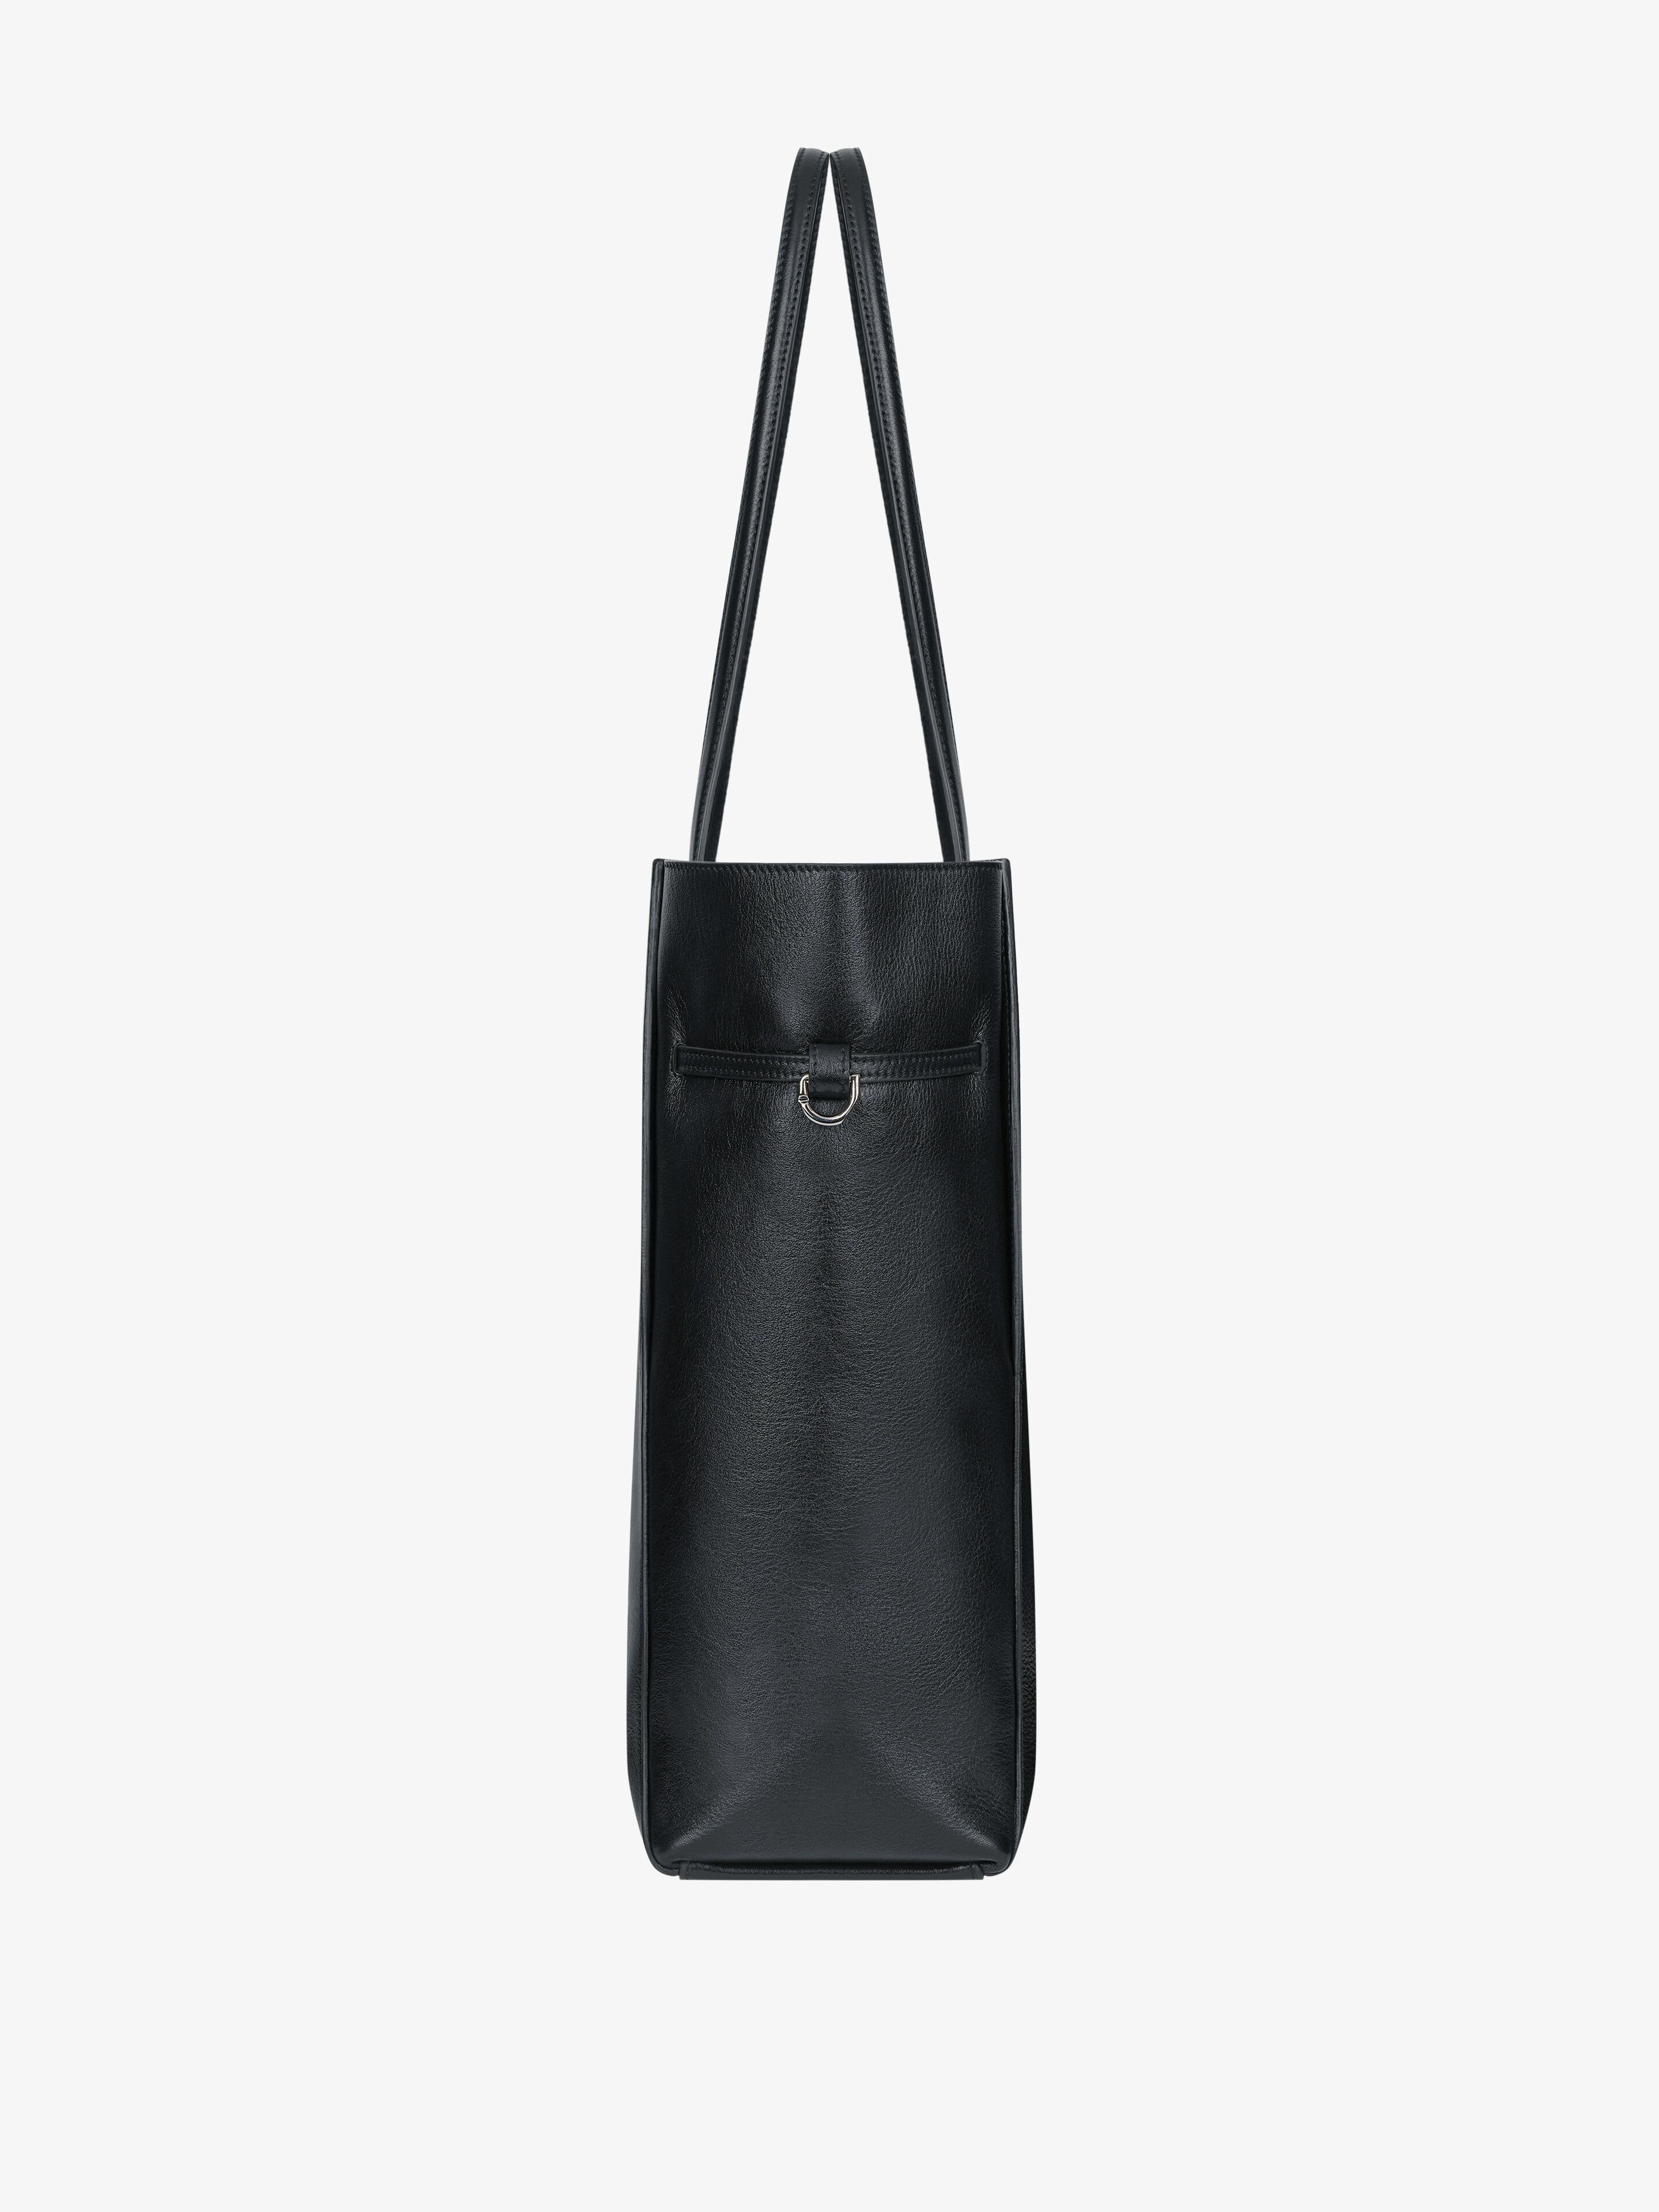 MEDIUM VOYOU TOTE BAG IN LEATHER - 4